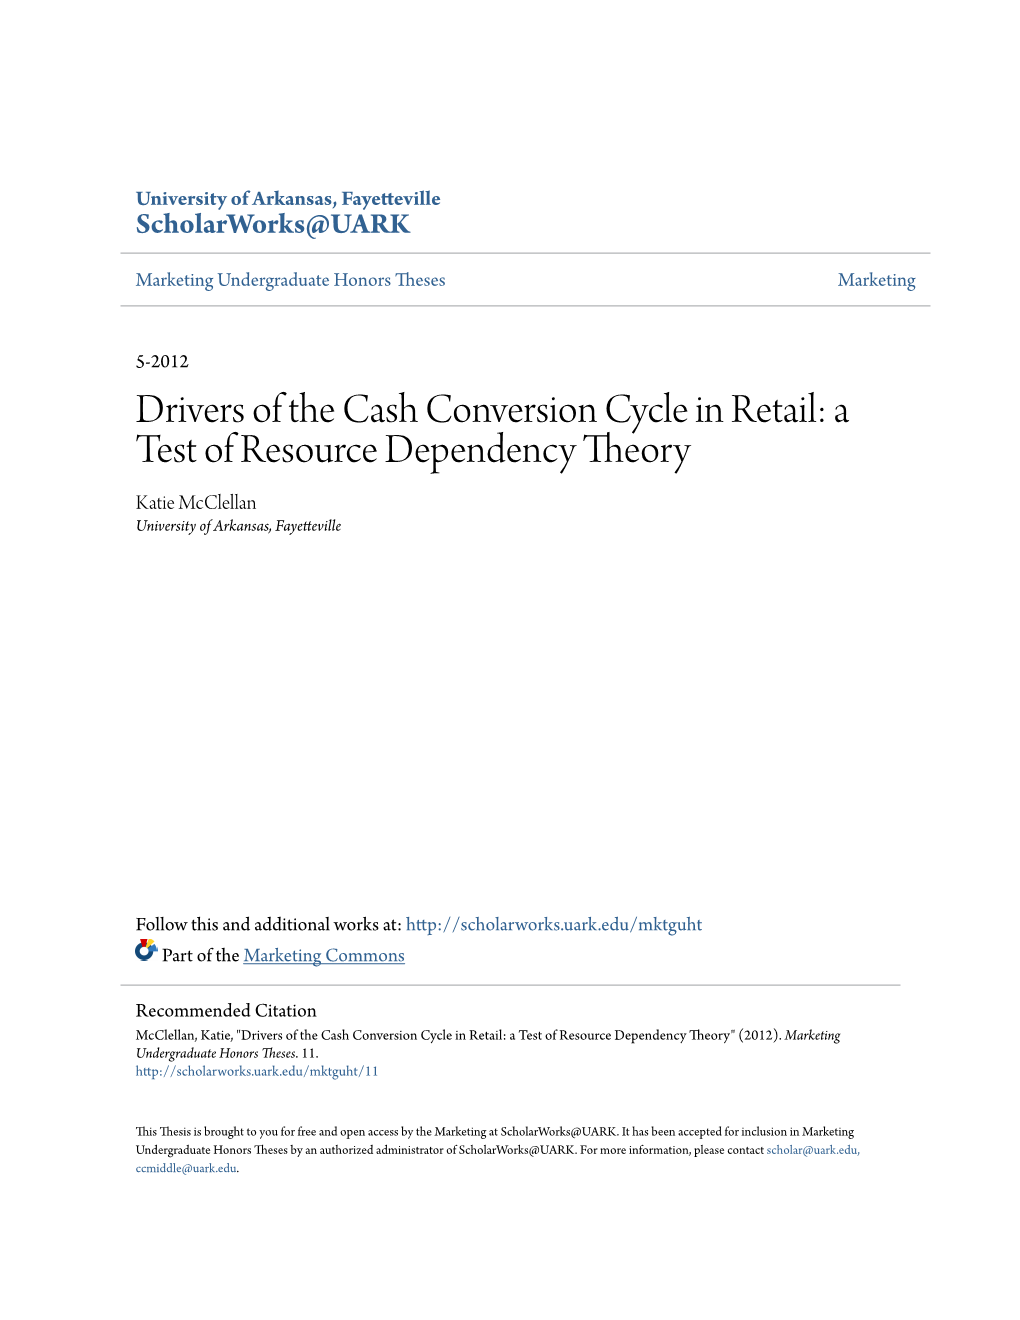 Drivers of the Cash Conversion Cycle in Retail: a Test of Resource Dependency Theory Katie Mcclellan University of Arkansas, Fayetteville